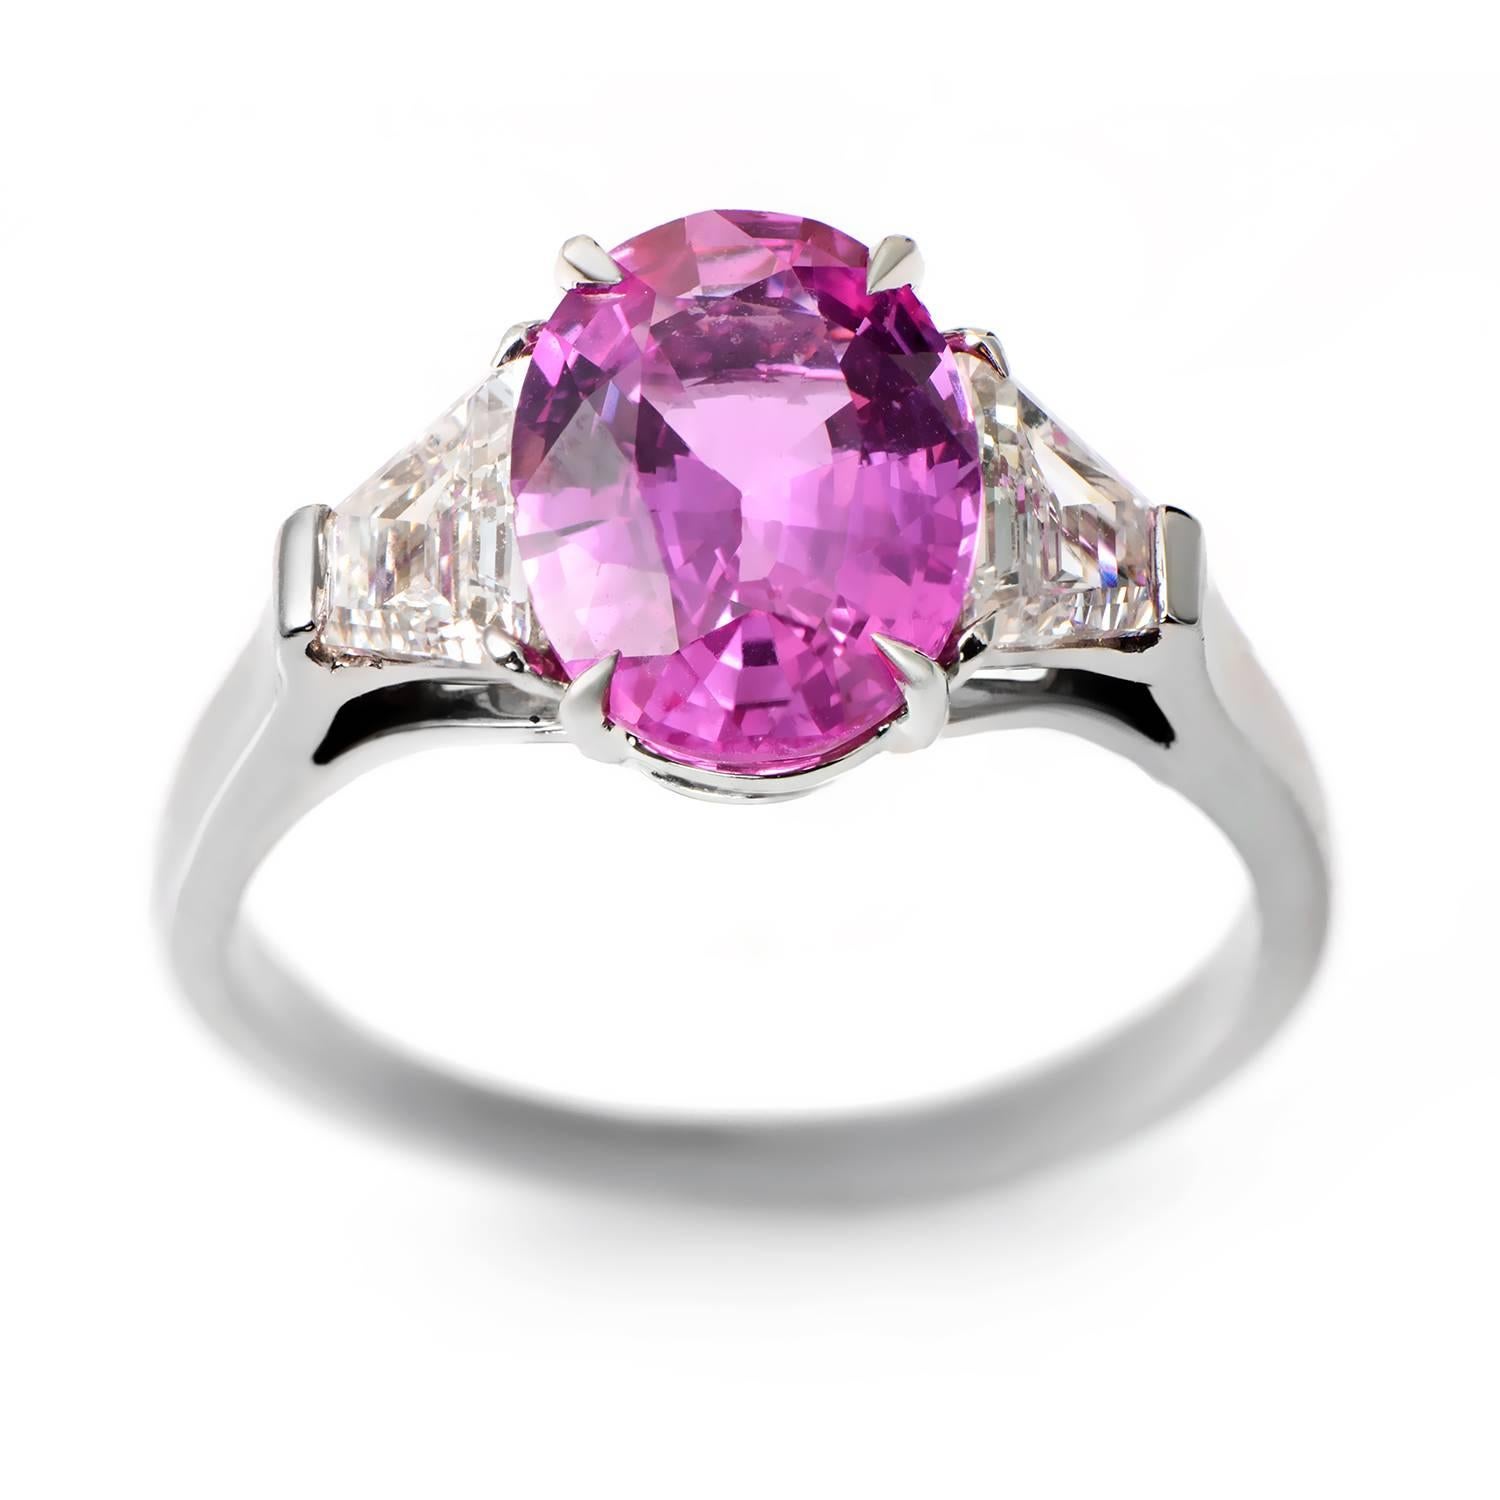 Made of prestigious platinum, this exquisite Bulgari ring boasts a stunning design that features a 3.37ct Burma pink sapphire (untreated). Lastly, the gorgeous main stone is flanked by two trapezoid-shaped diamonds weighing approximately .50ct